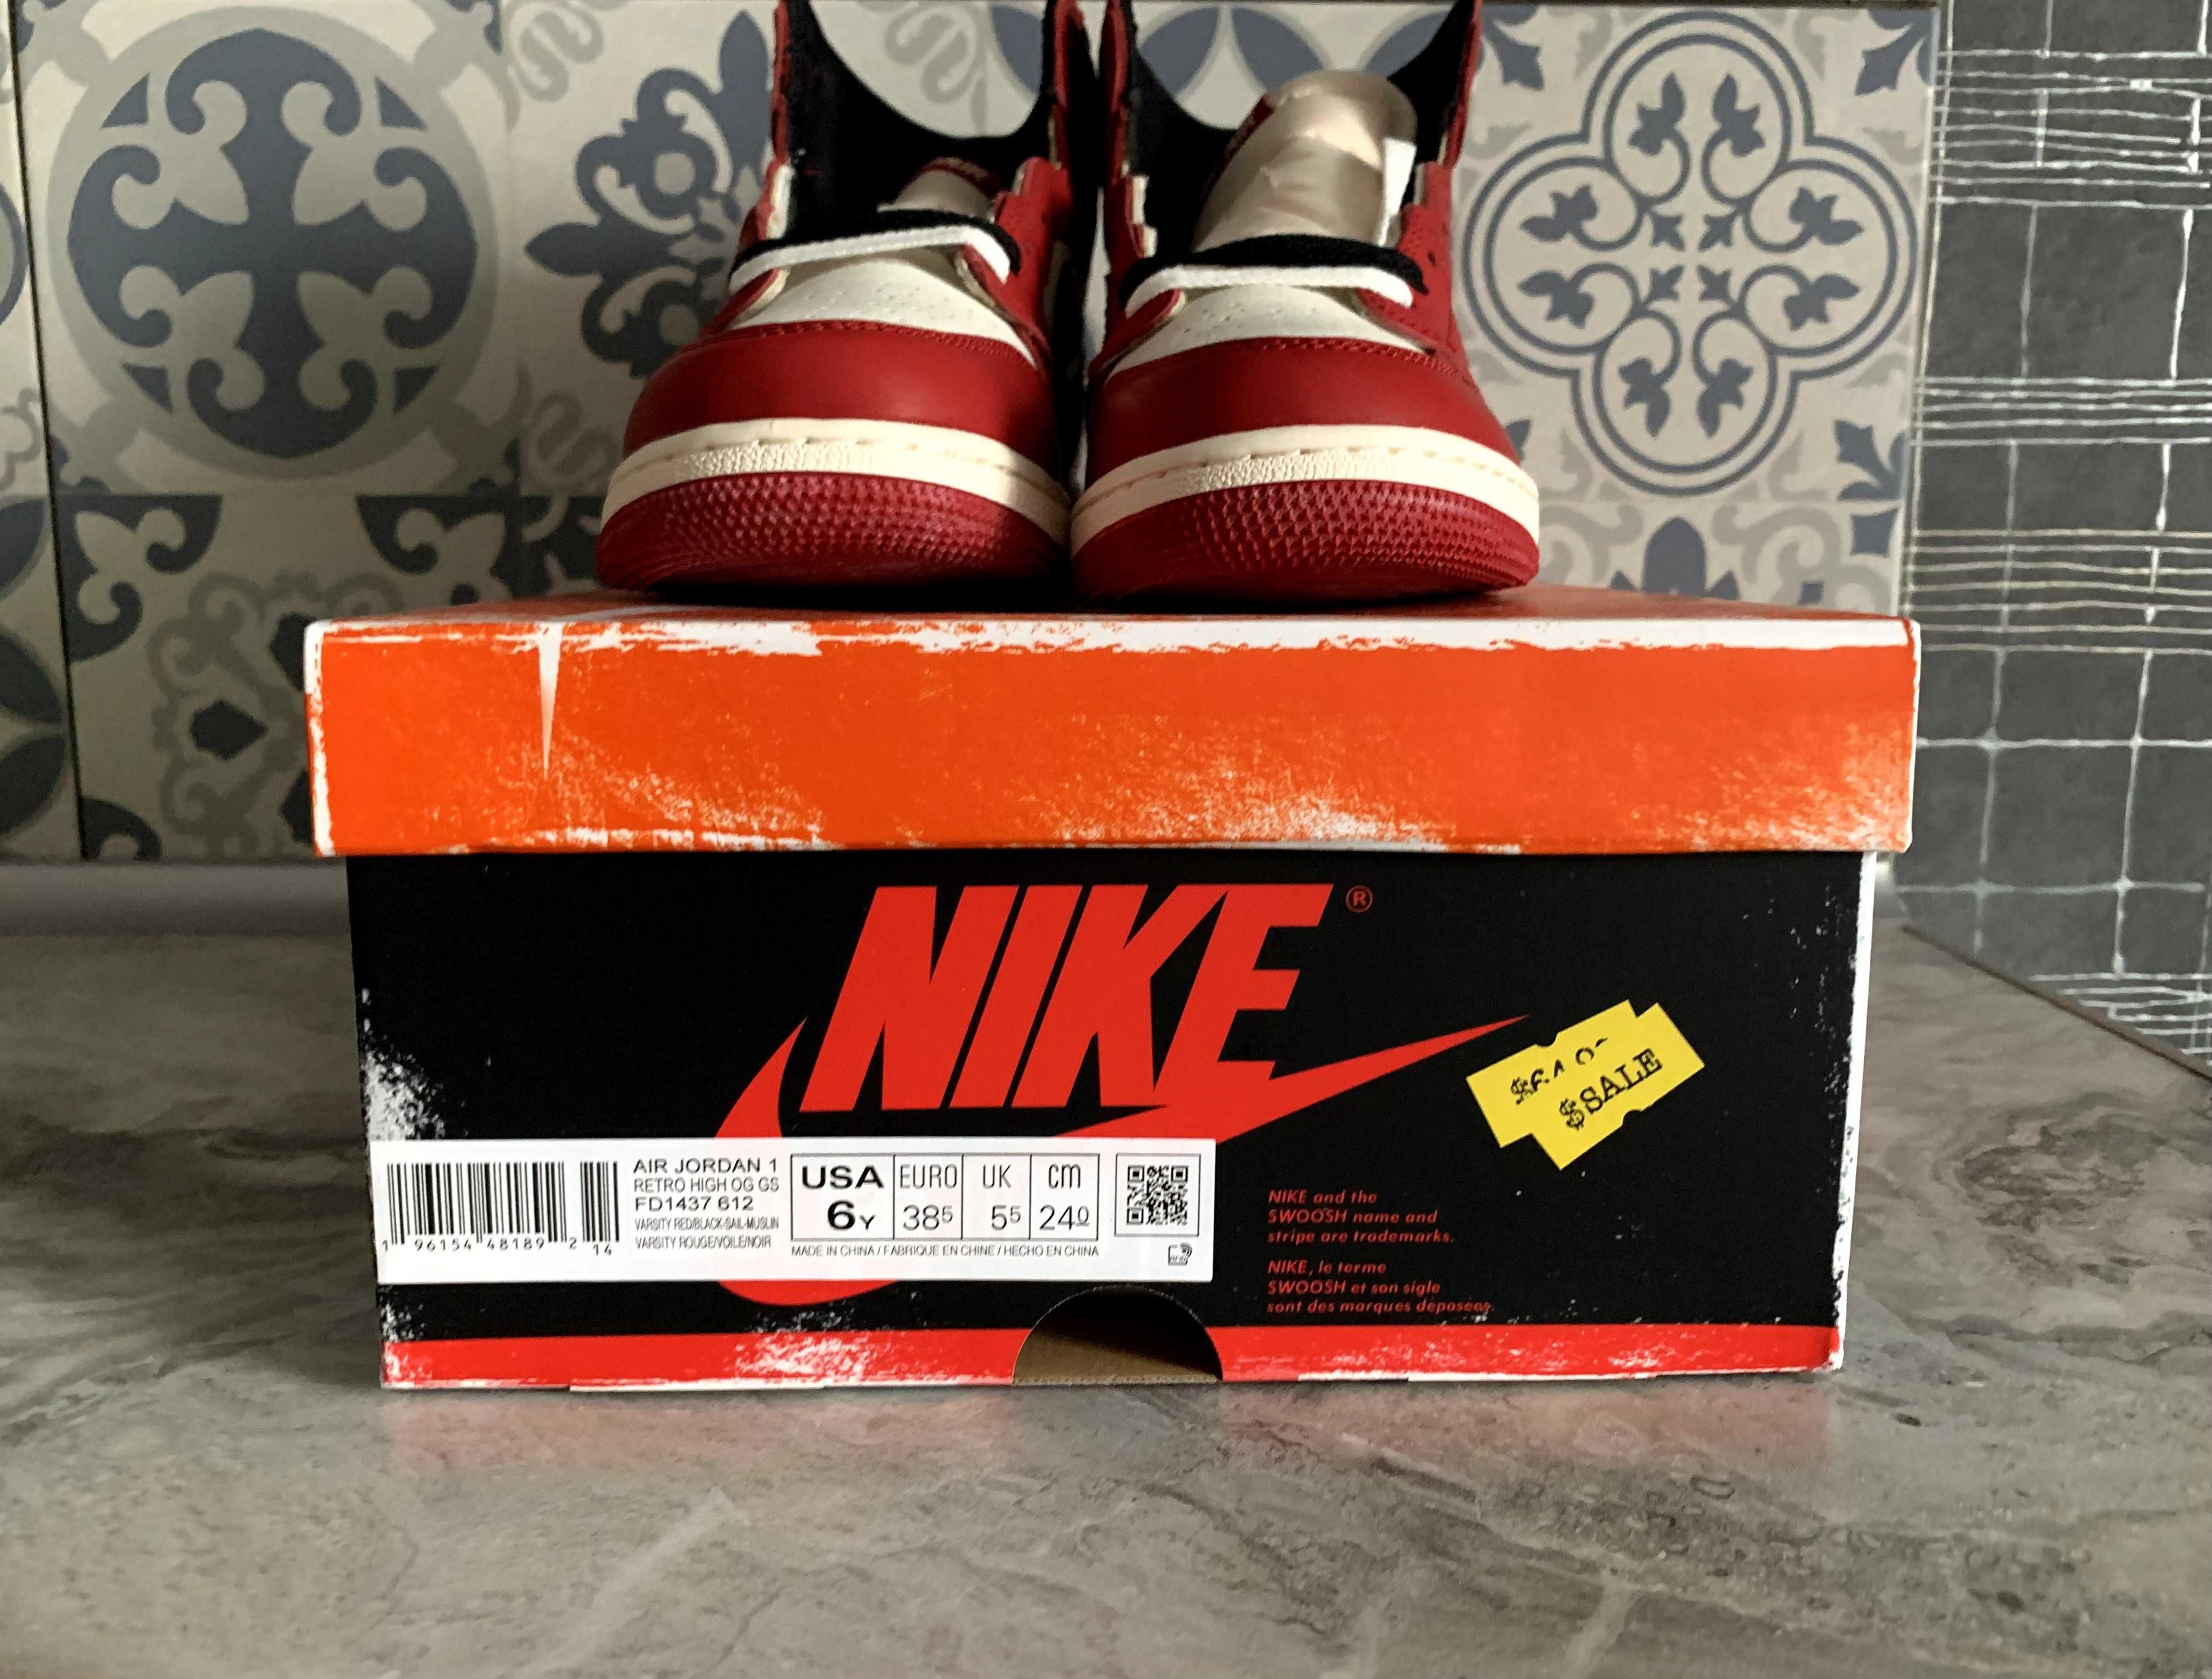 Air Jordan 1 Retro High OG Chicago Lost and Found (GS)